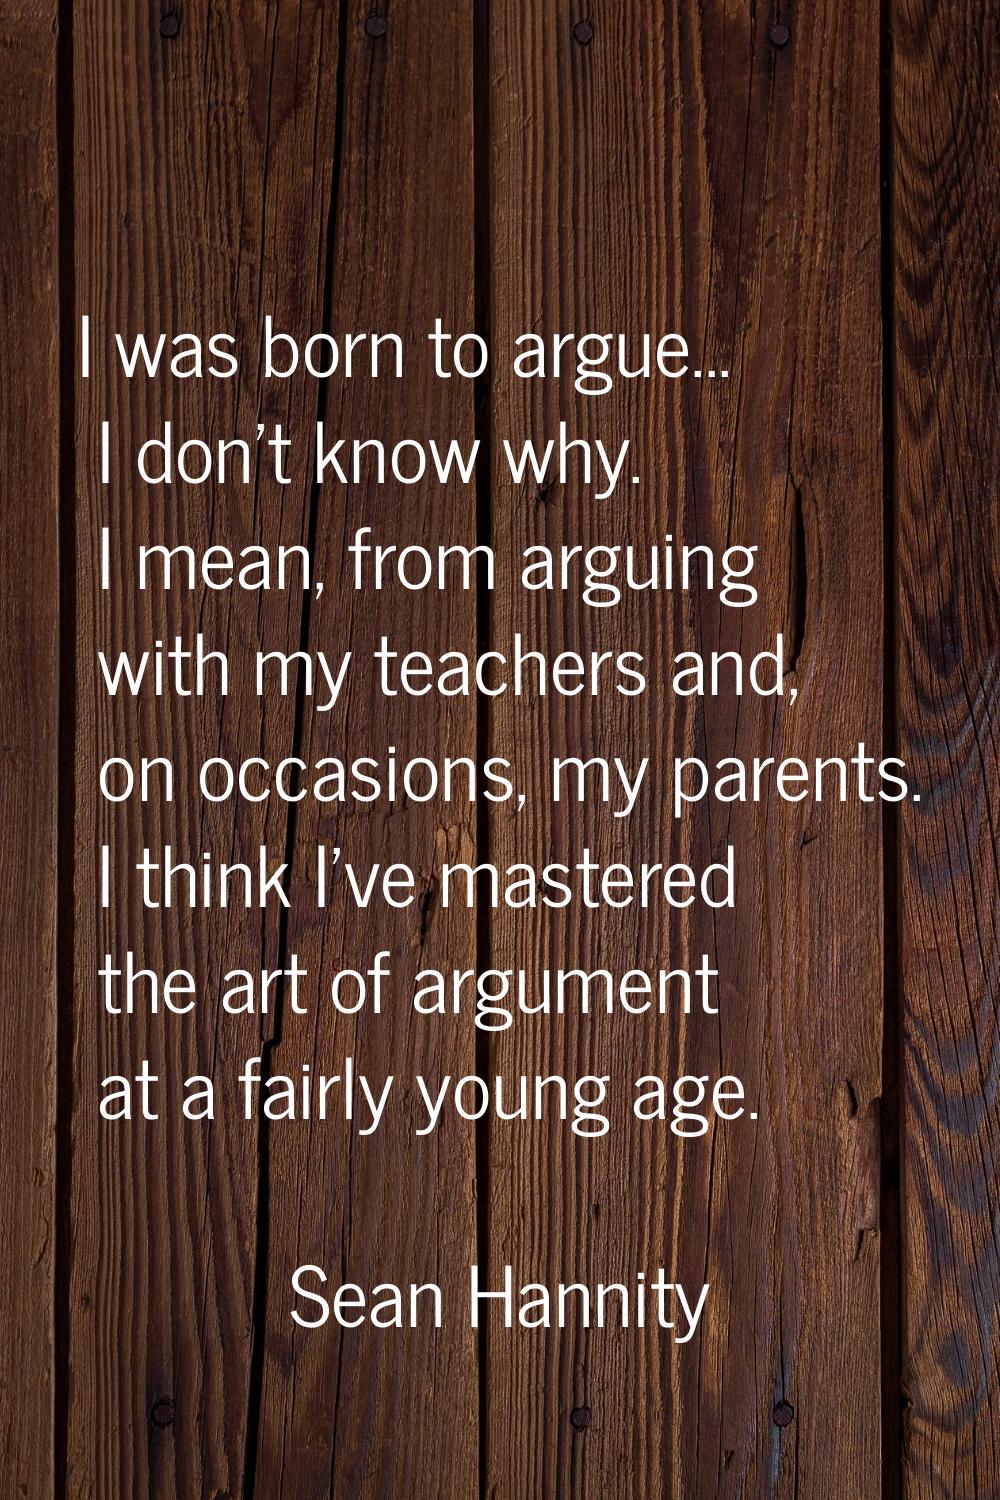 I was born to argue... I don't know why. I mean, from arguing with my teachers and, on occasions, m